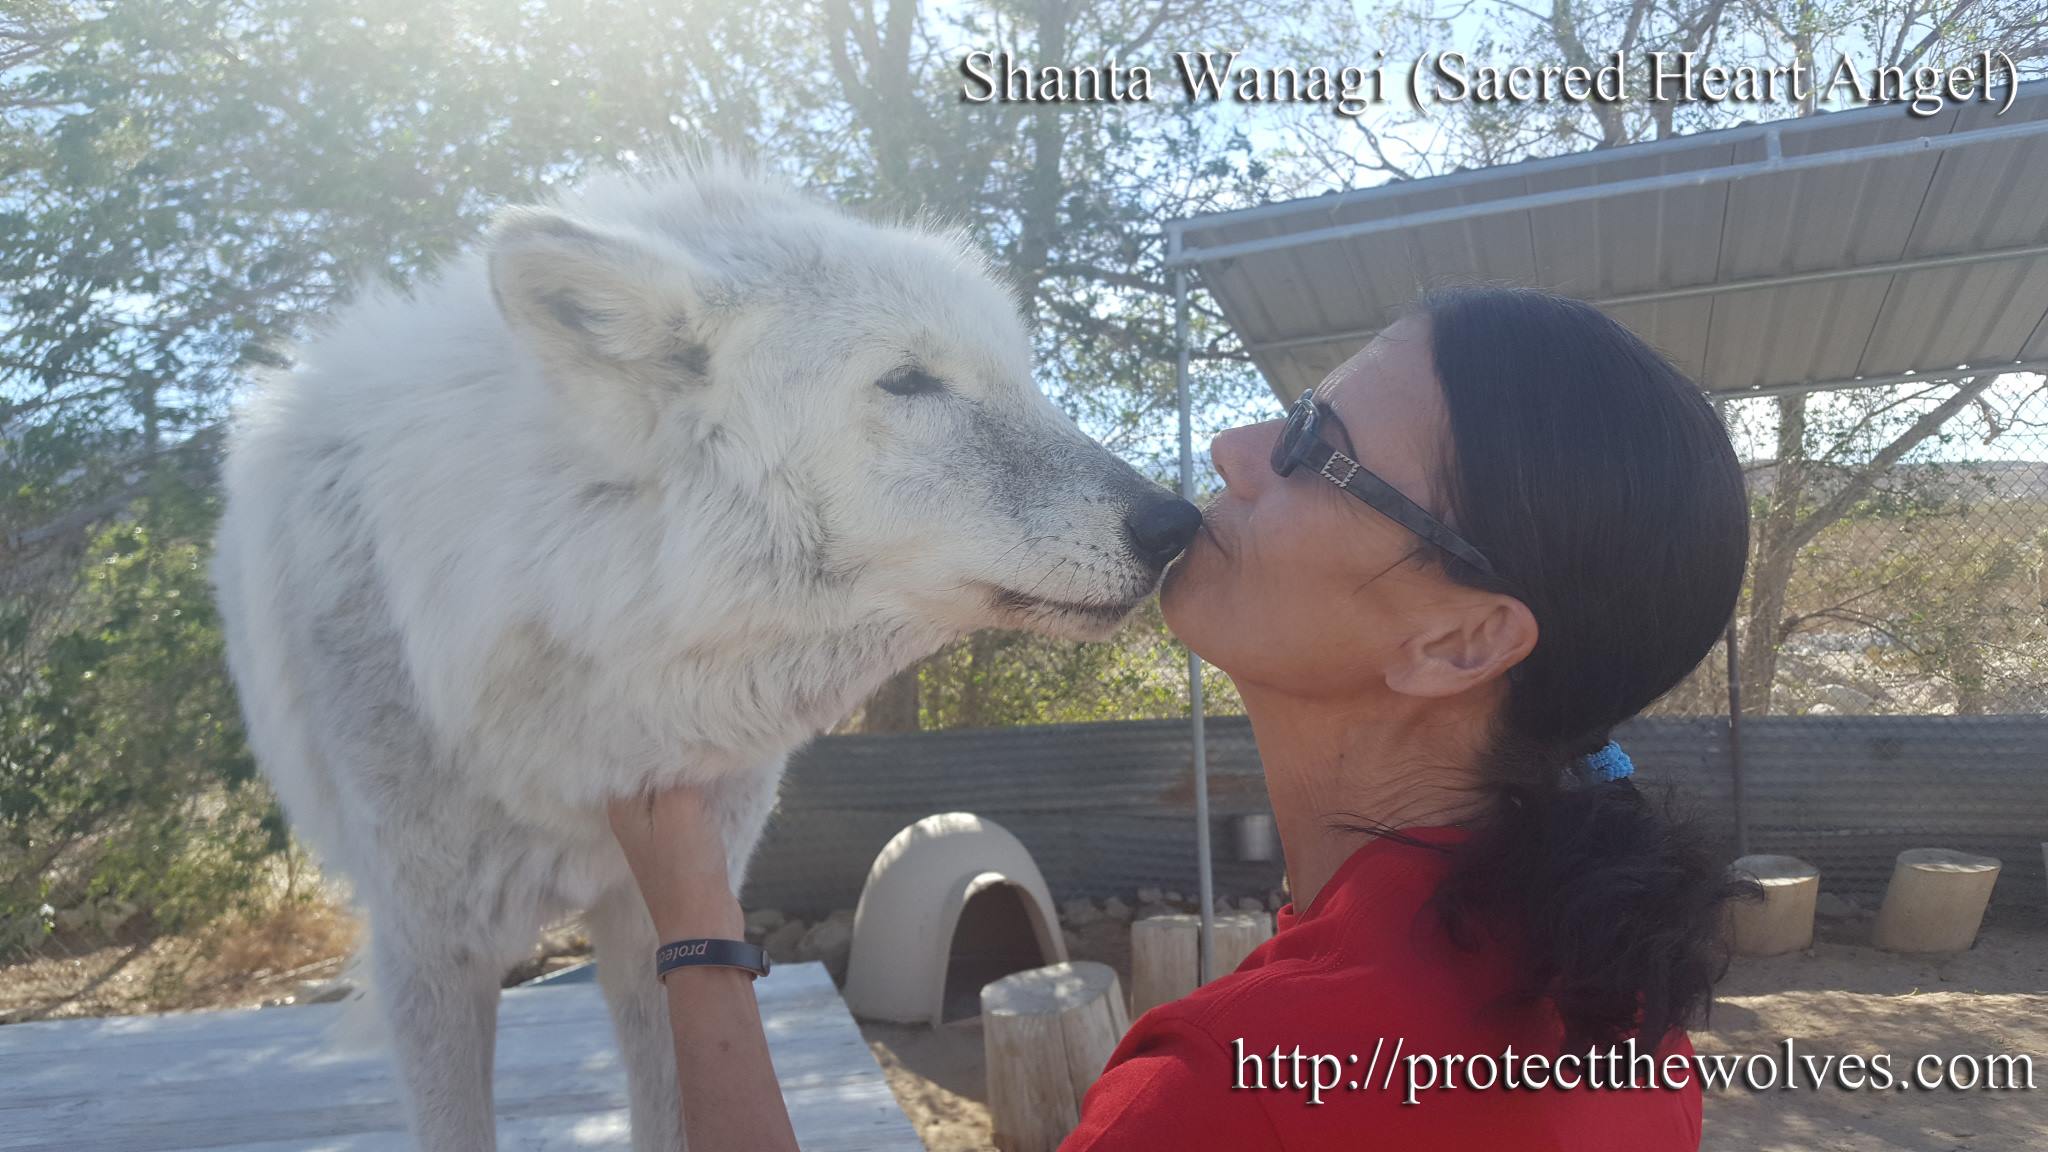 protect the wolves, wolves, wolf, native american religious nonprofit